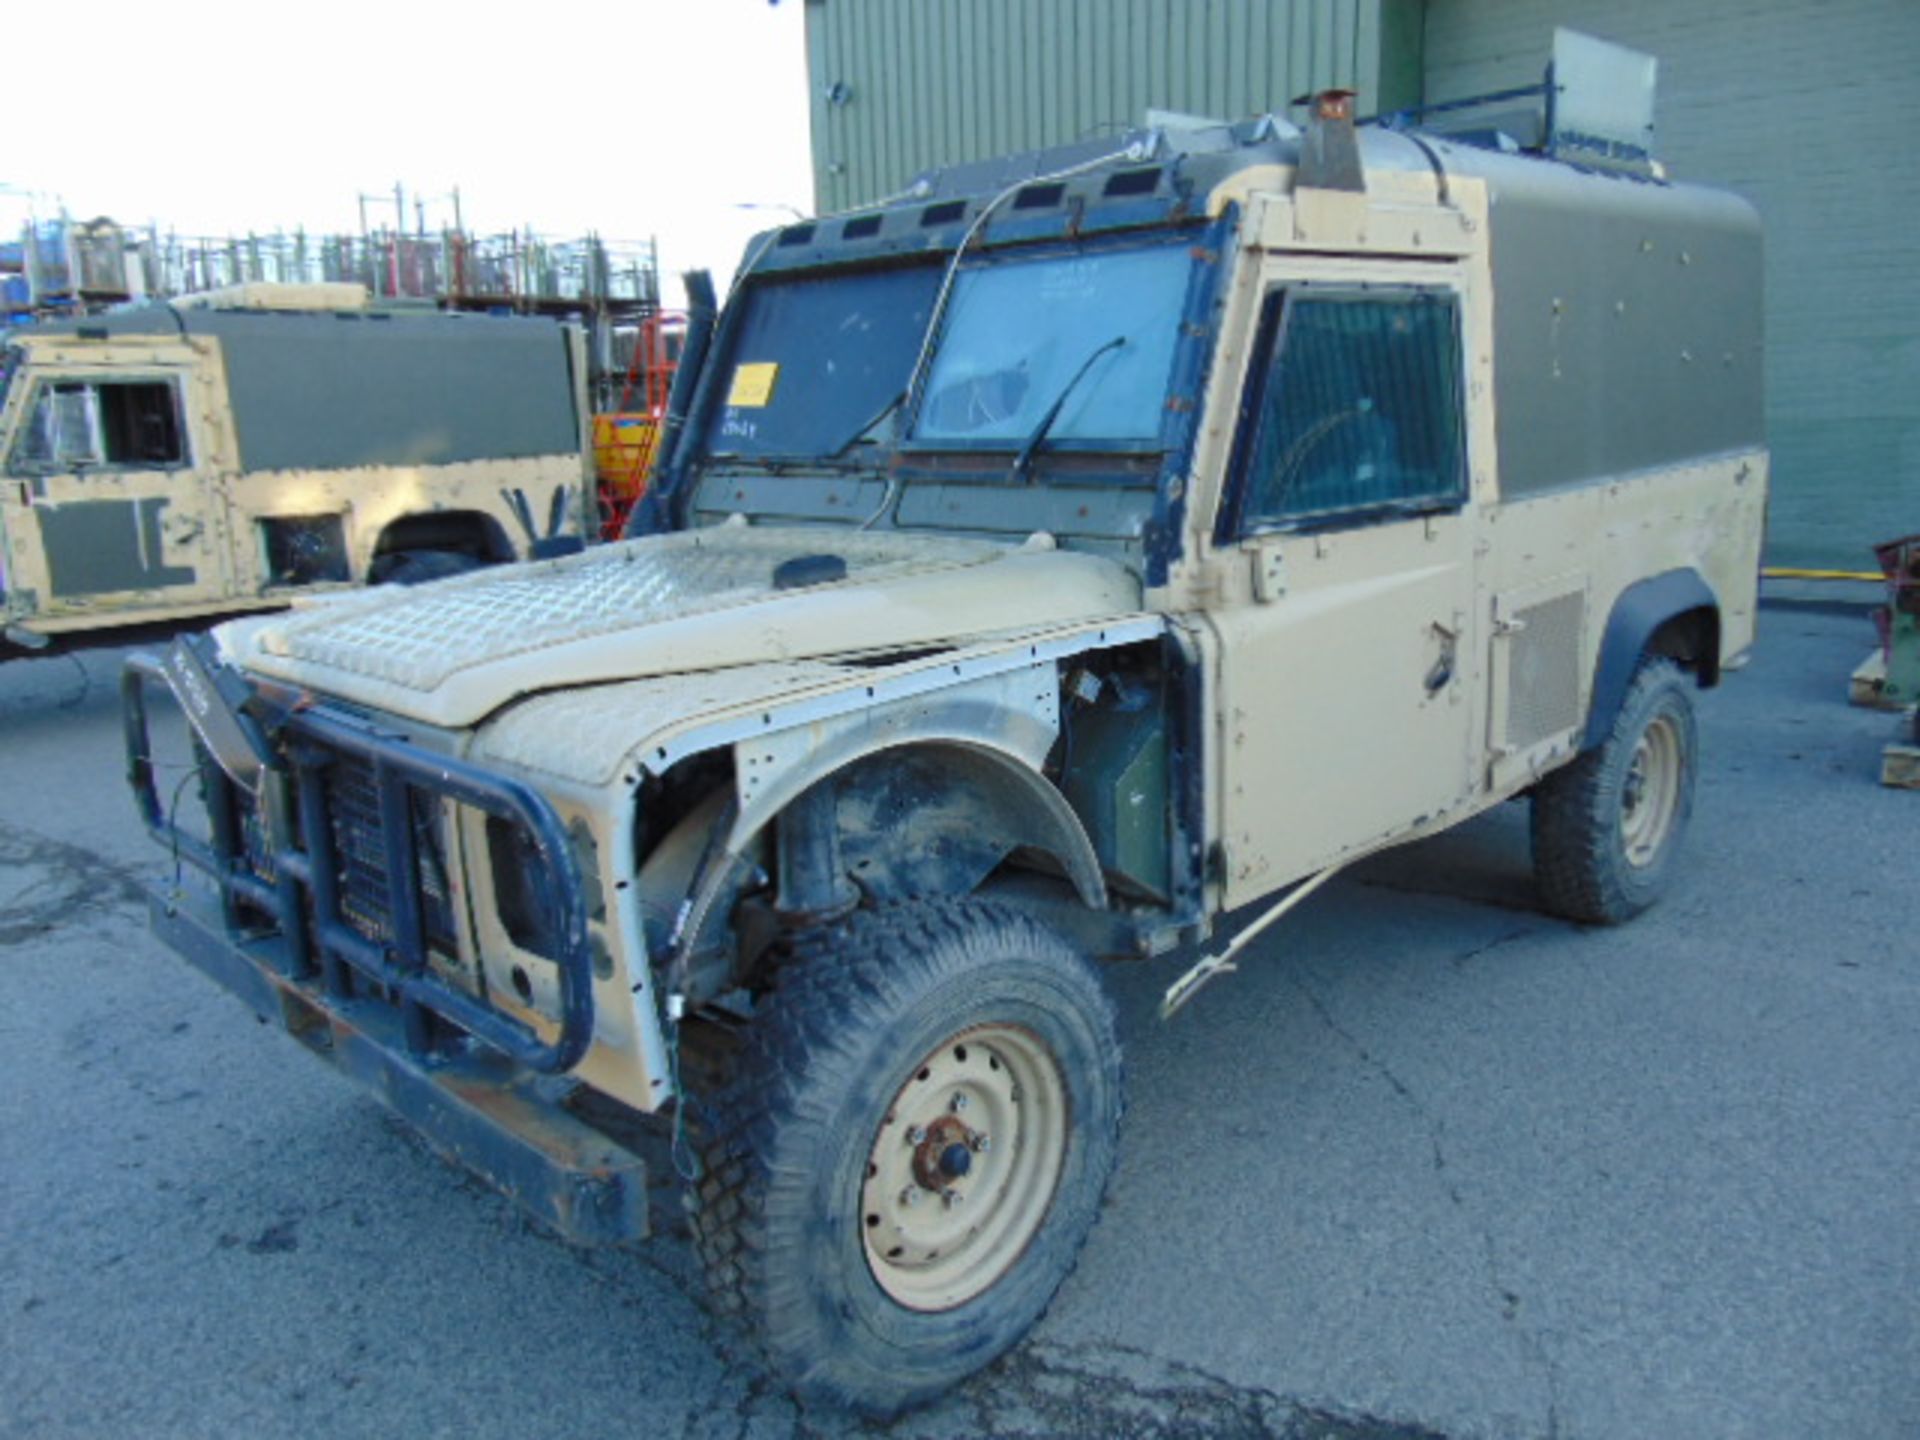 Very Rare Direct from Service Unmanned Landrover 110 300TDi Panama Snatch-2A - Image 3 of 14